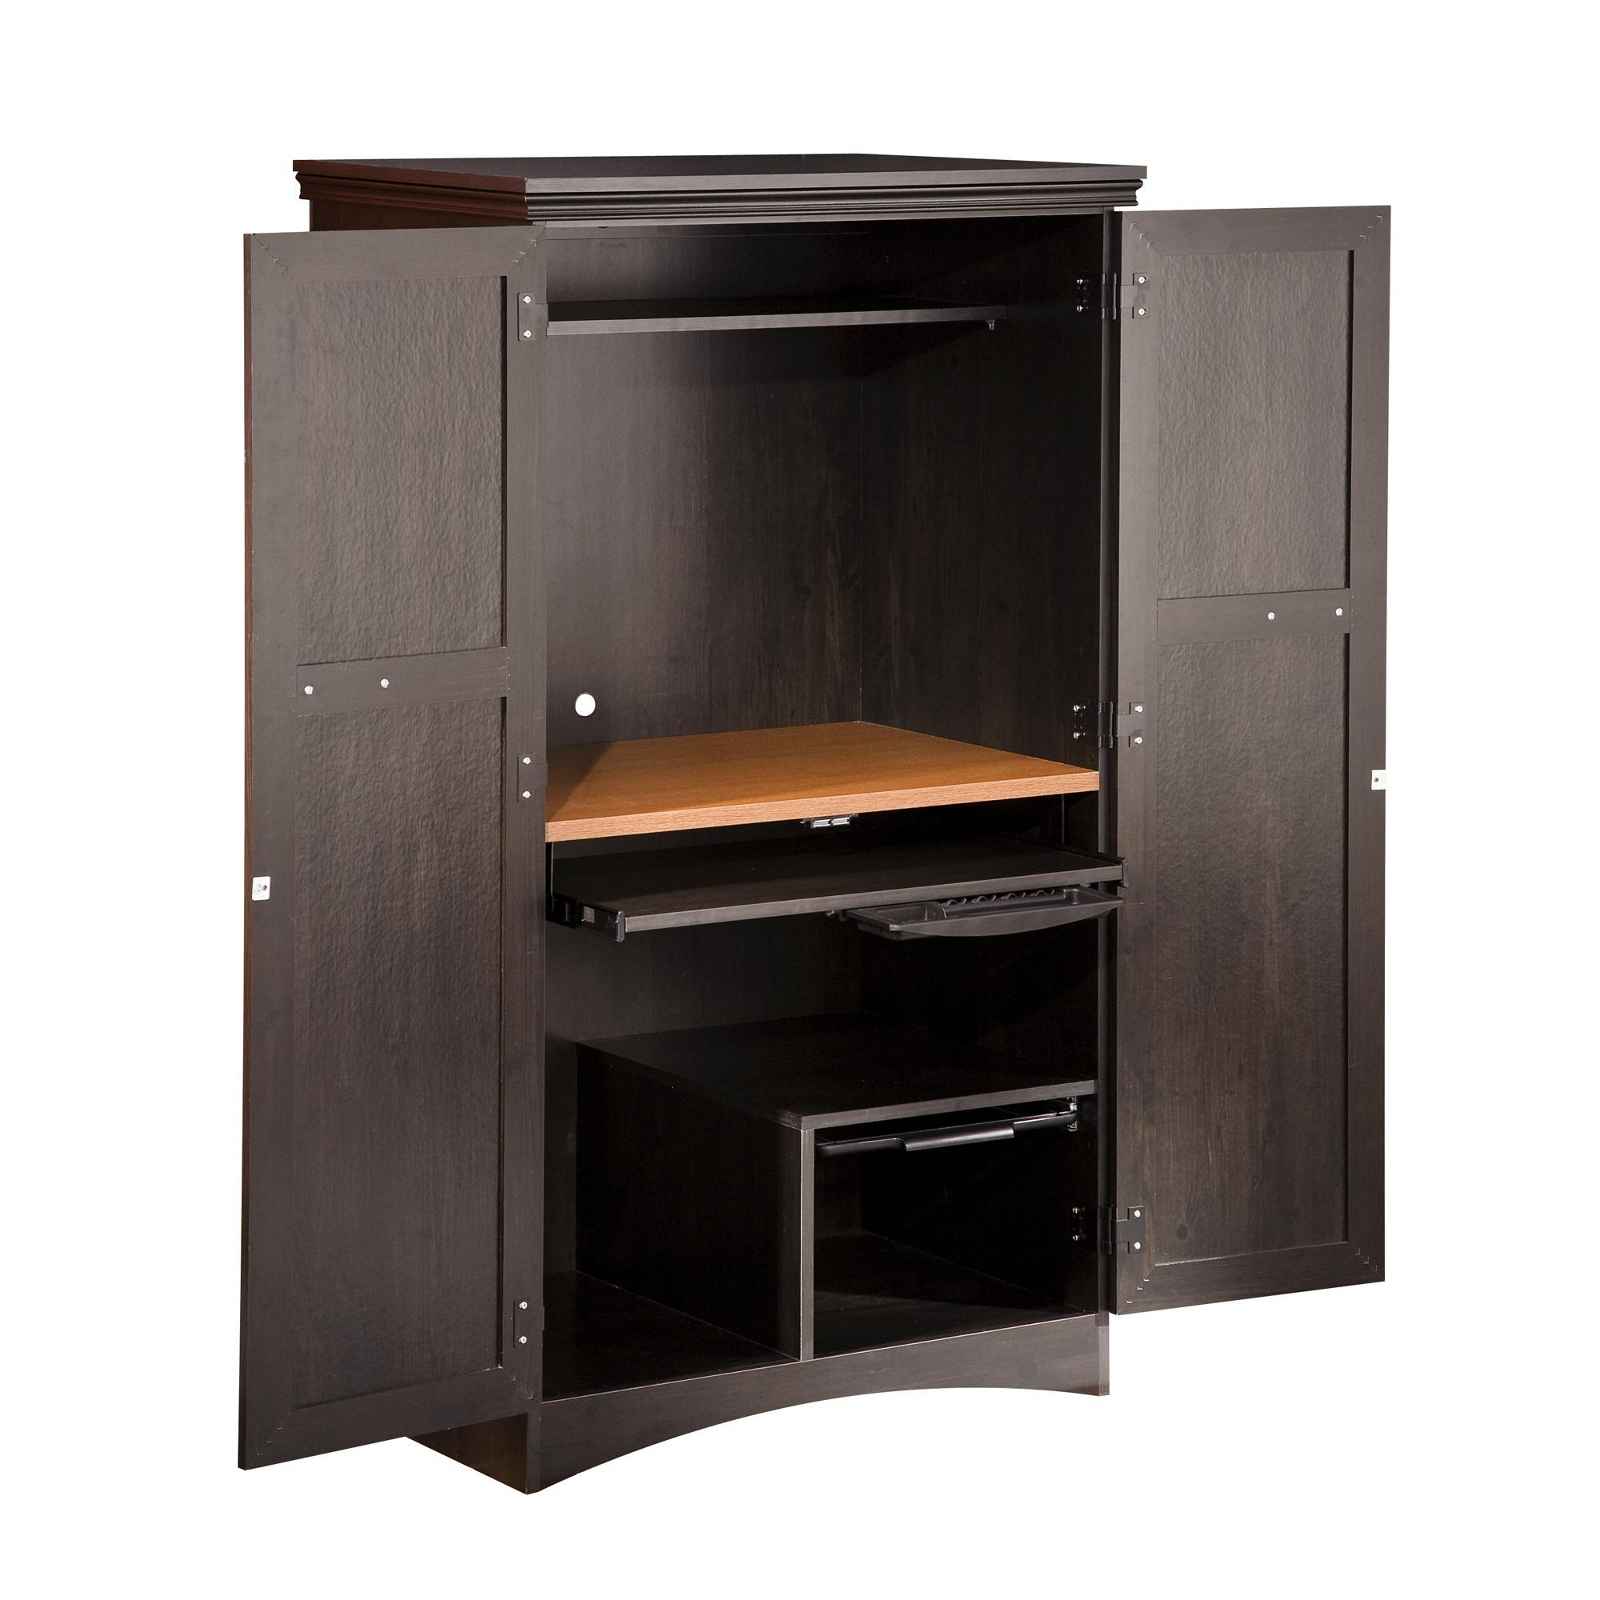 Gascony Country Mission Black Ebony and Spice Computer Armoire